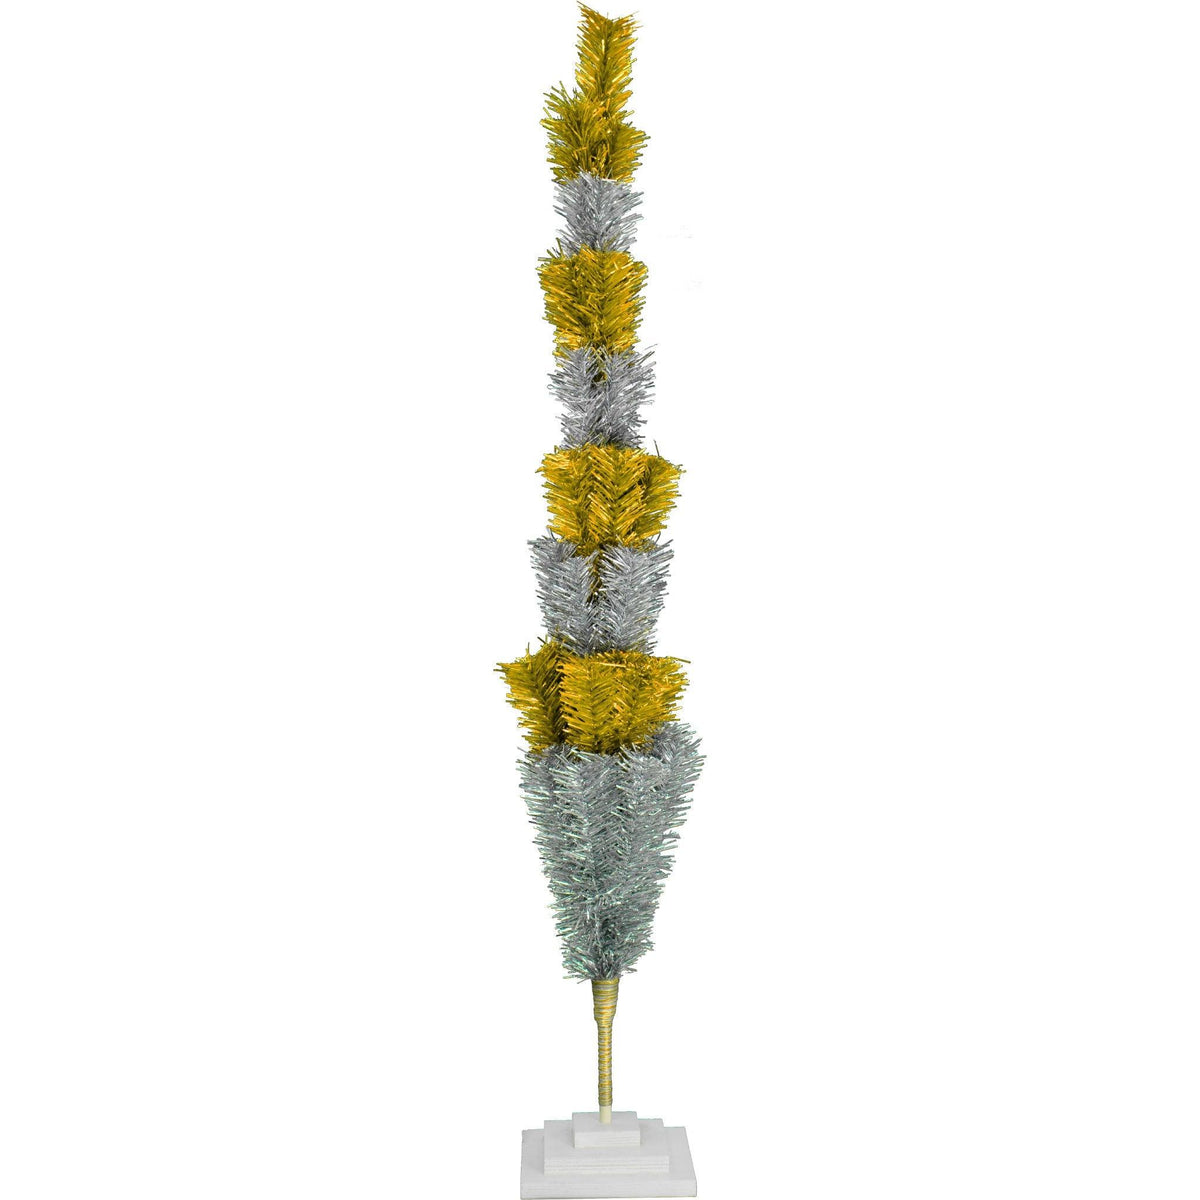 48in tall Shiny Gold and Metallic Silver Layered Tinsel Christmas Trees on sale at leedisplay.com